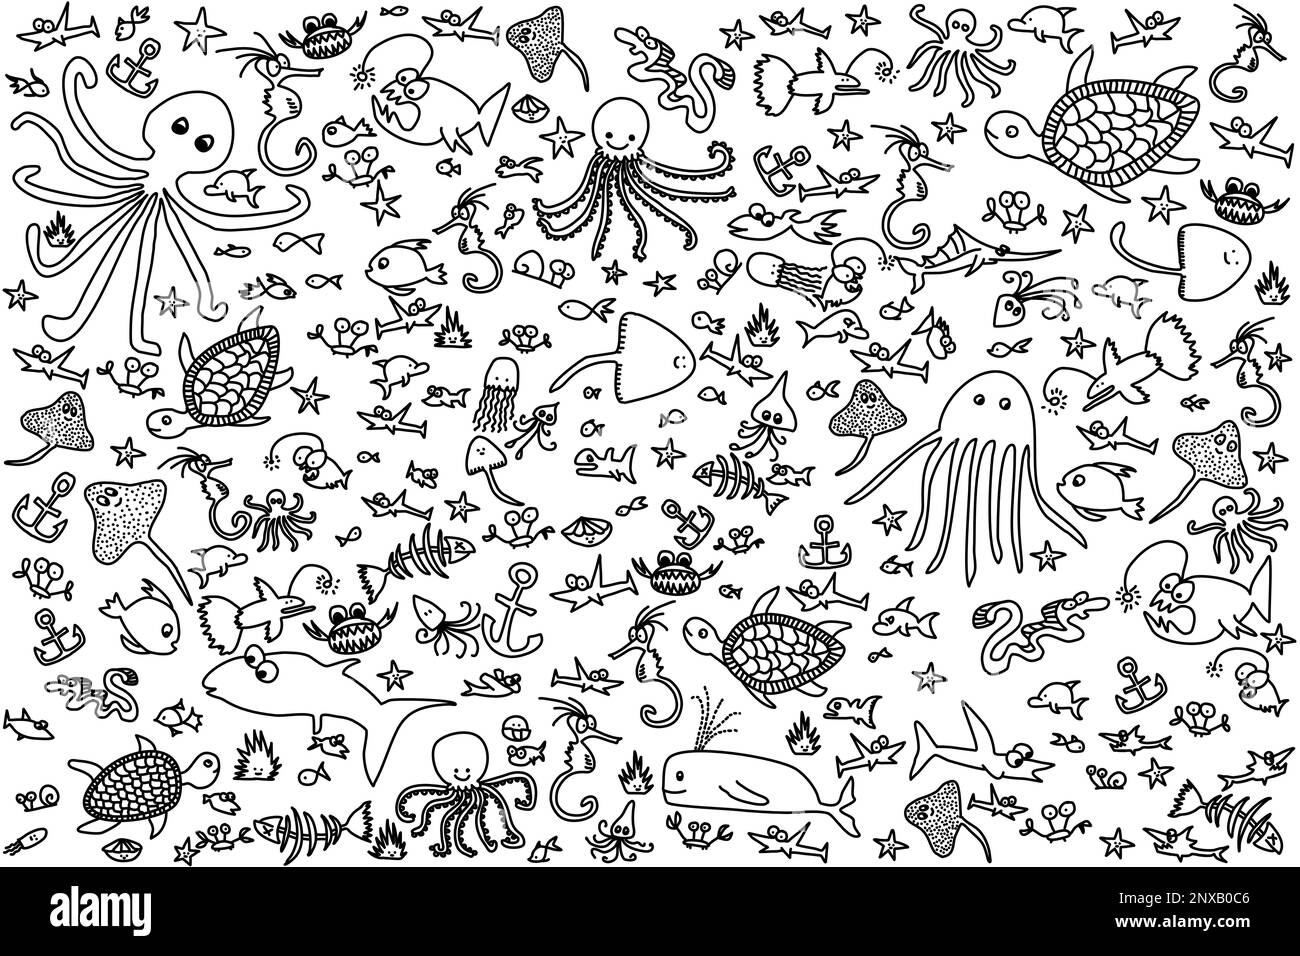 Abstract seamless pattern with underwater sea creatures in the marine world including fish, octopus, seahorses and turtles. Black line drawing Stock Photo